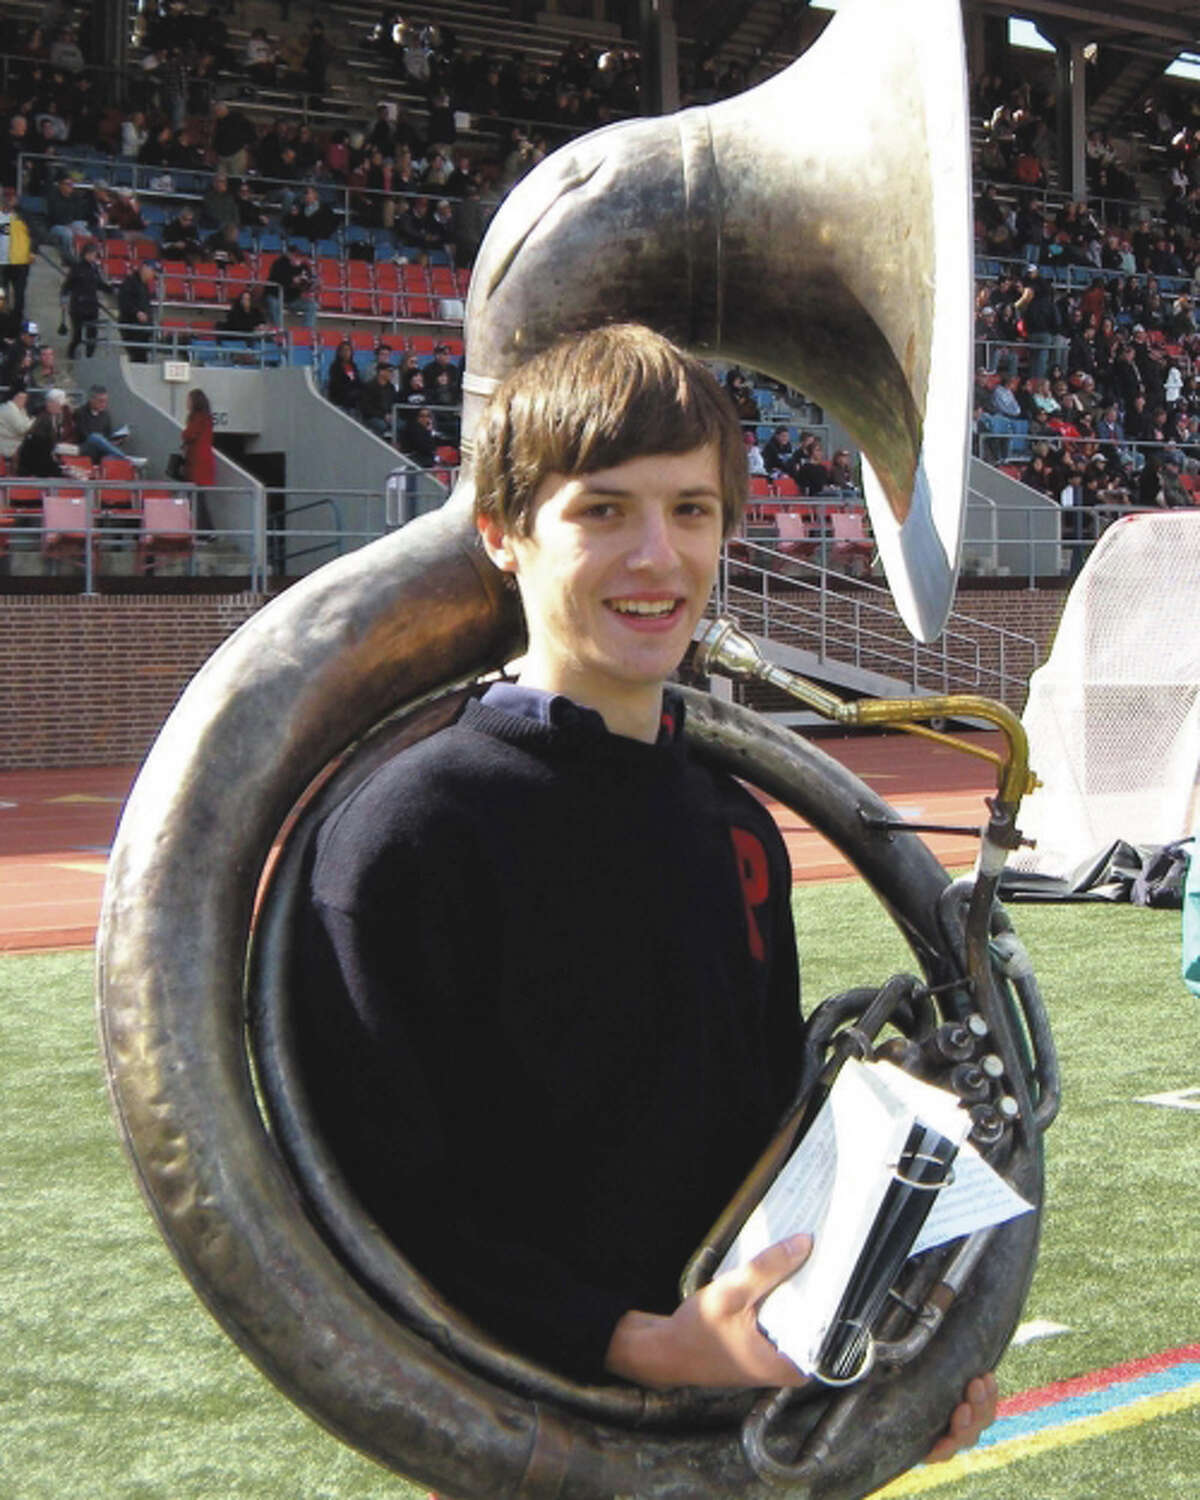 Oliver Pacchiana, 20, of Greenwich, shown here as a member of the University of Pennsylvania marching band, was killed Sunday, March 31, 2013, when he fell during a rock-climbing expedition on a spring break trip to Namibia. The 2010 Greenwich High School graduate was enrolled in a semester-abroad program in South Africa through the Council on International Educational Exchange (CIEE). Pacchiana was a junior at the University of Pennsylvania in Philadelphia.